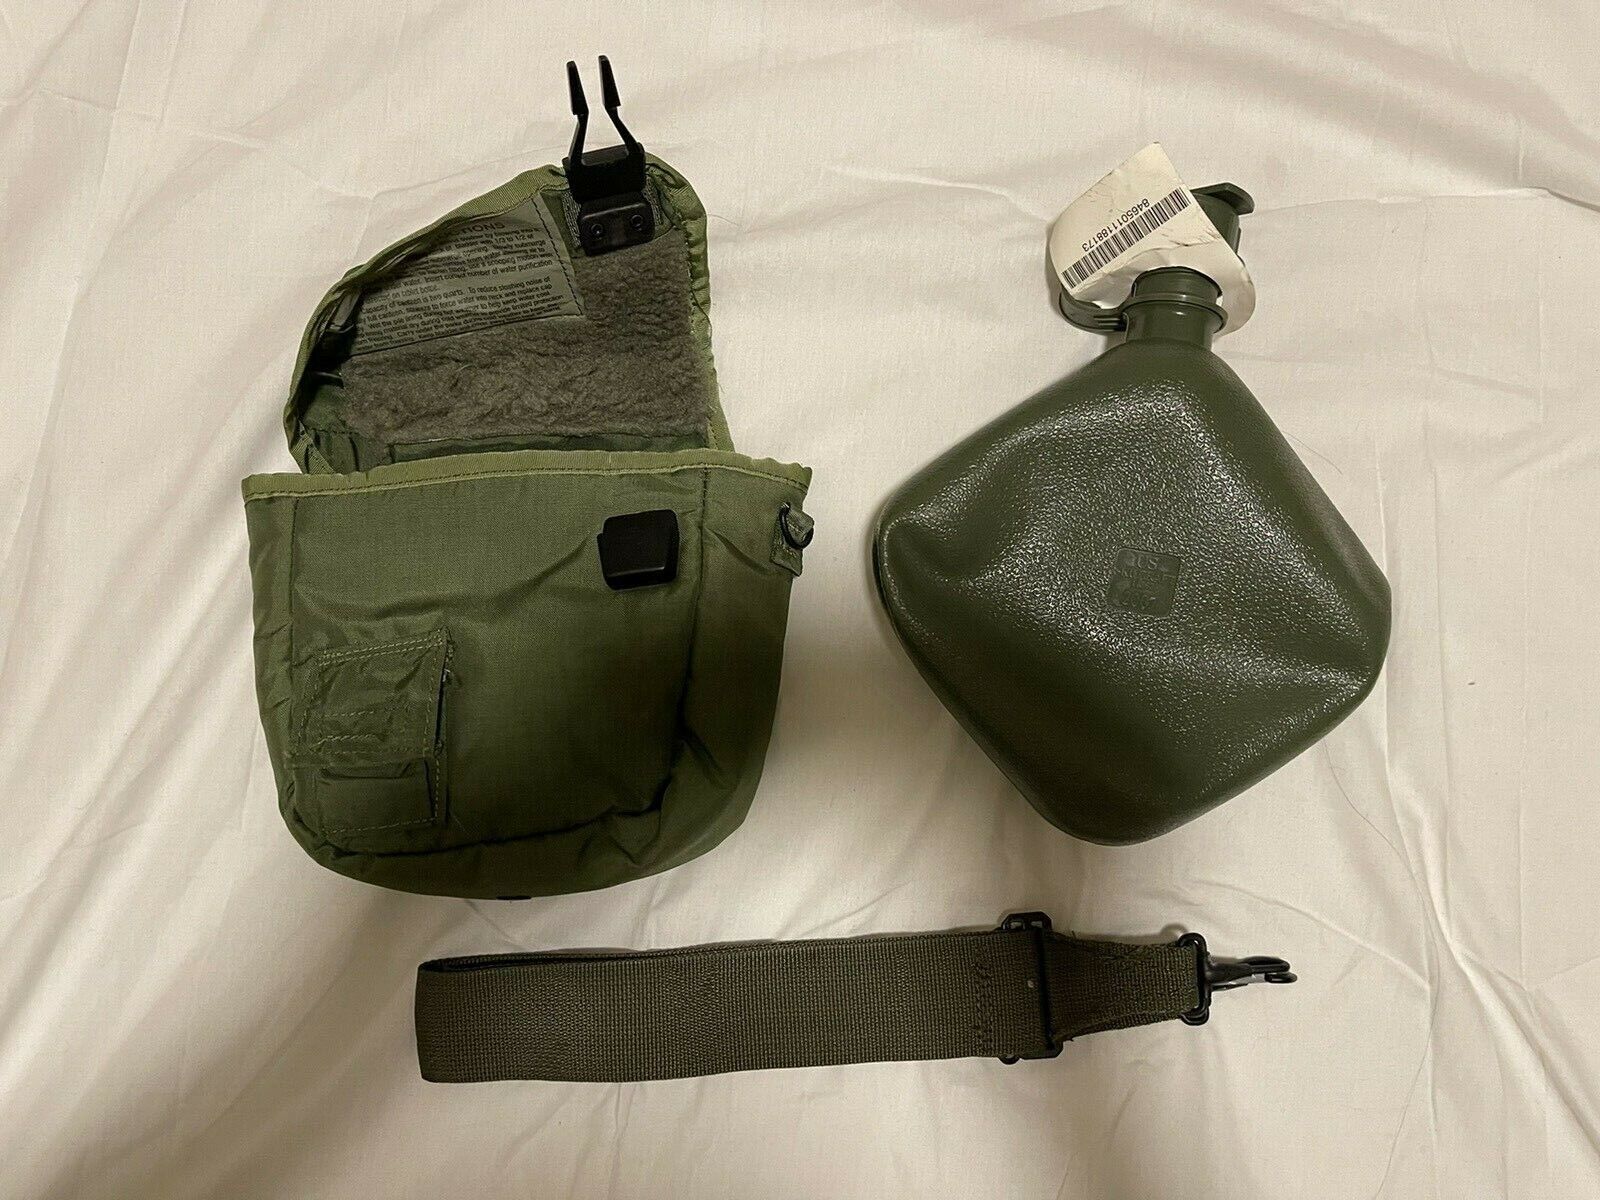 New-US GI O.D.Green 2 Qt Canteen with Carrier/Cover and Shoulder Strap,Un-Issued